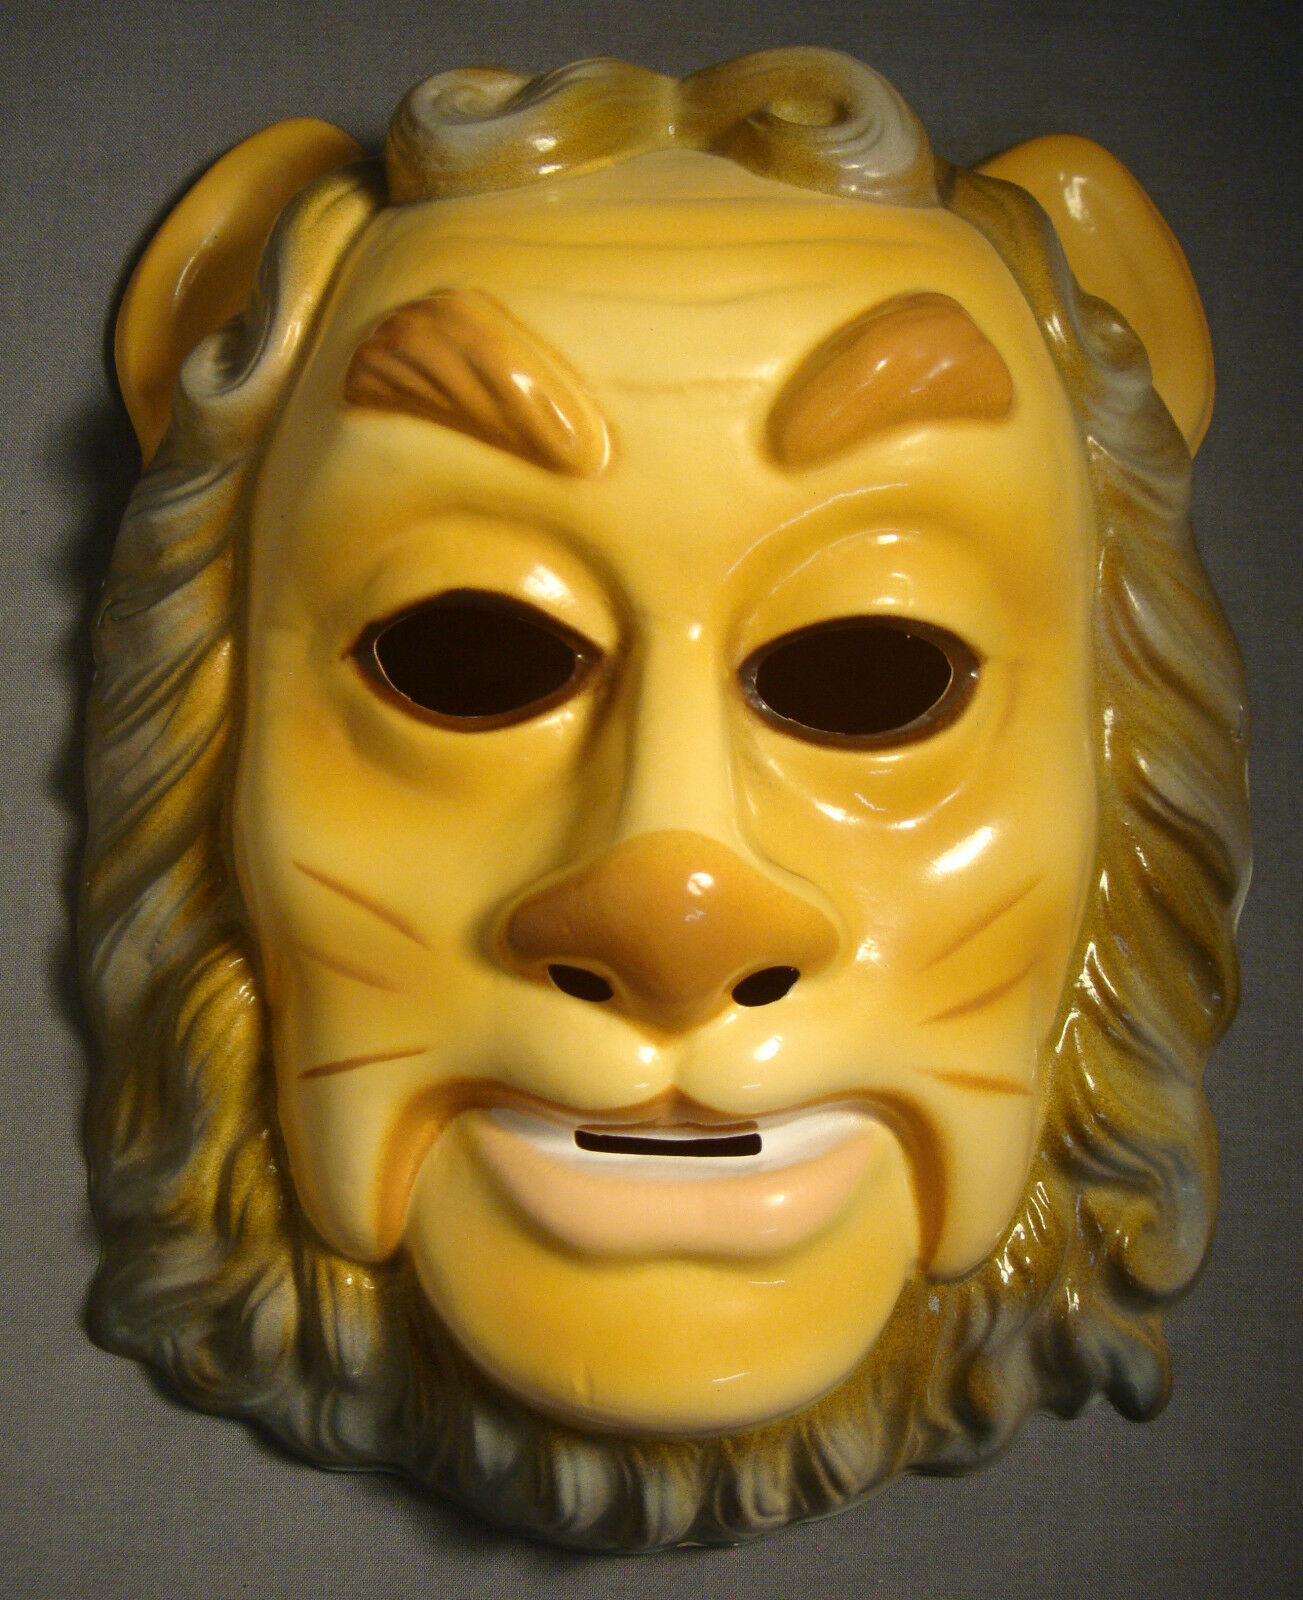 Primary image for THE WIZARD OF OZ COWARDLY LION HALLOWEEN MASK PVC / PLASTIC